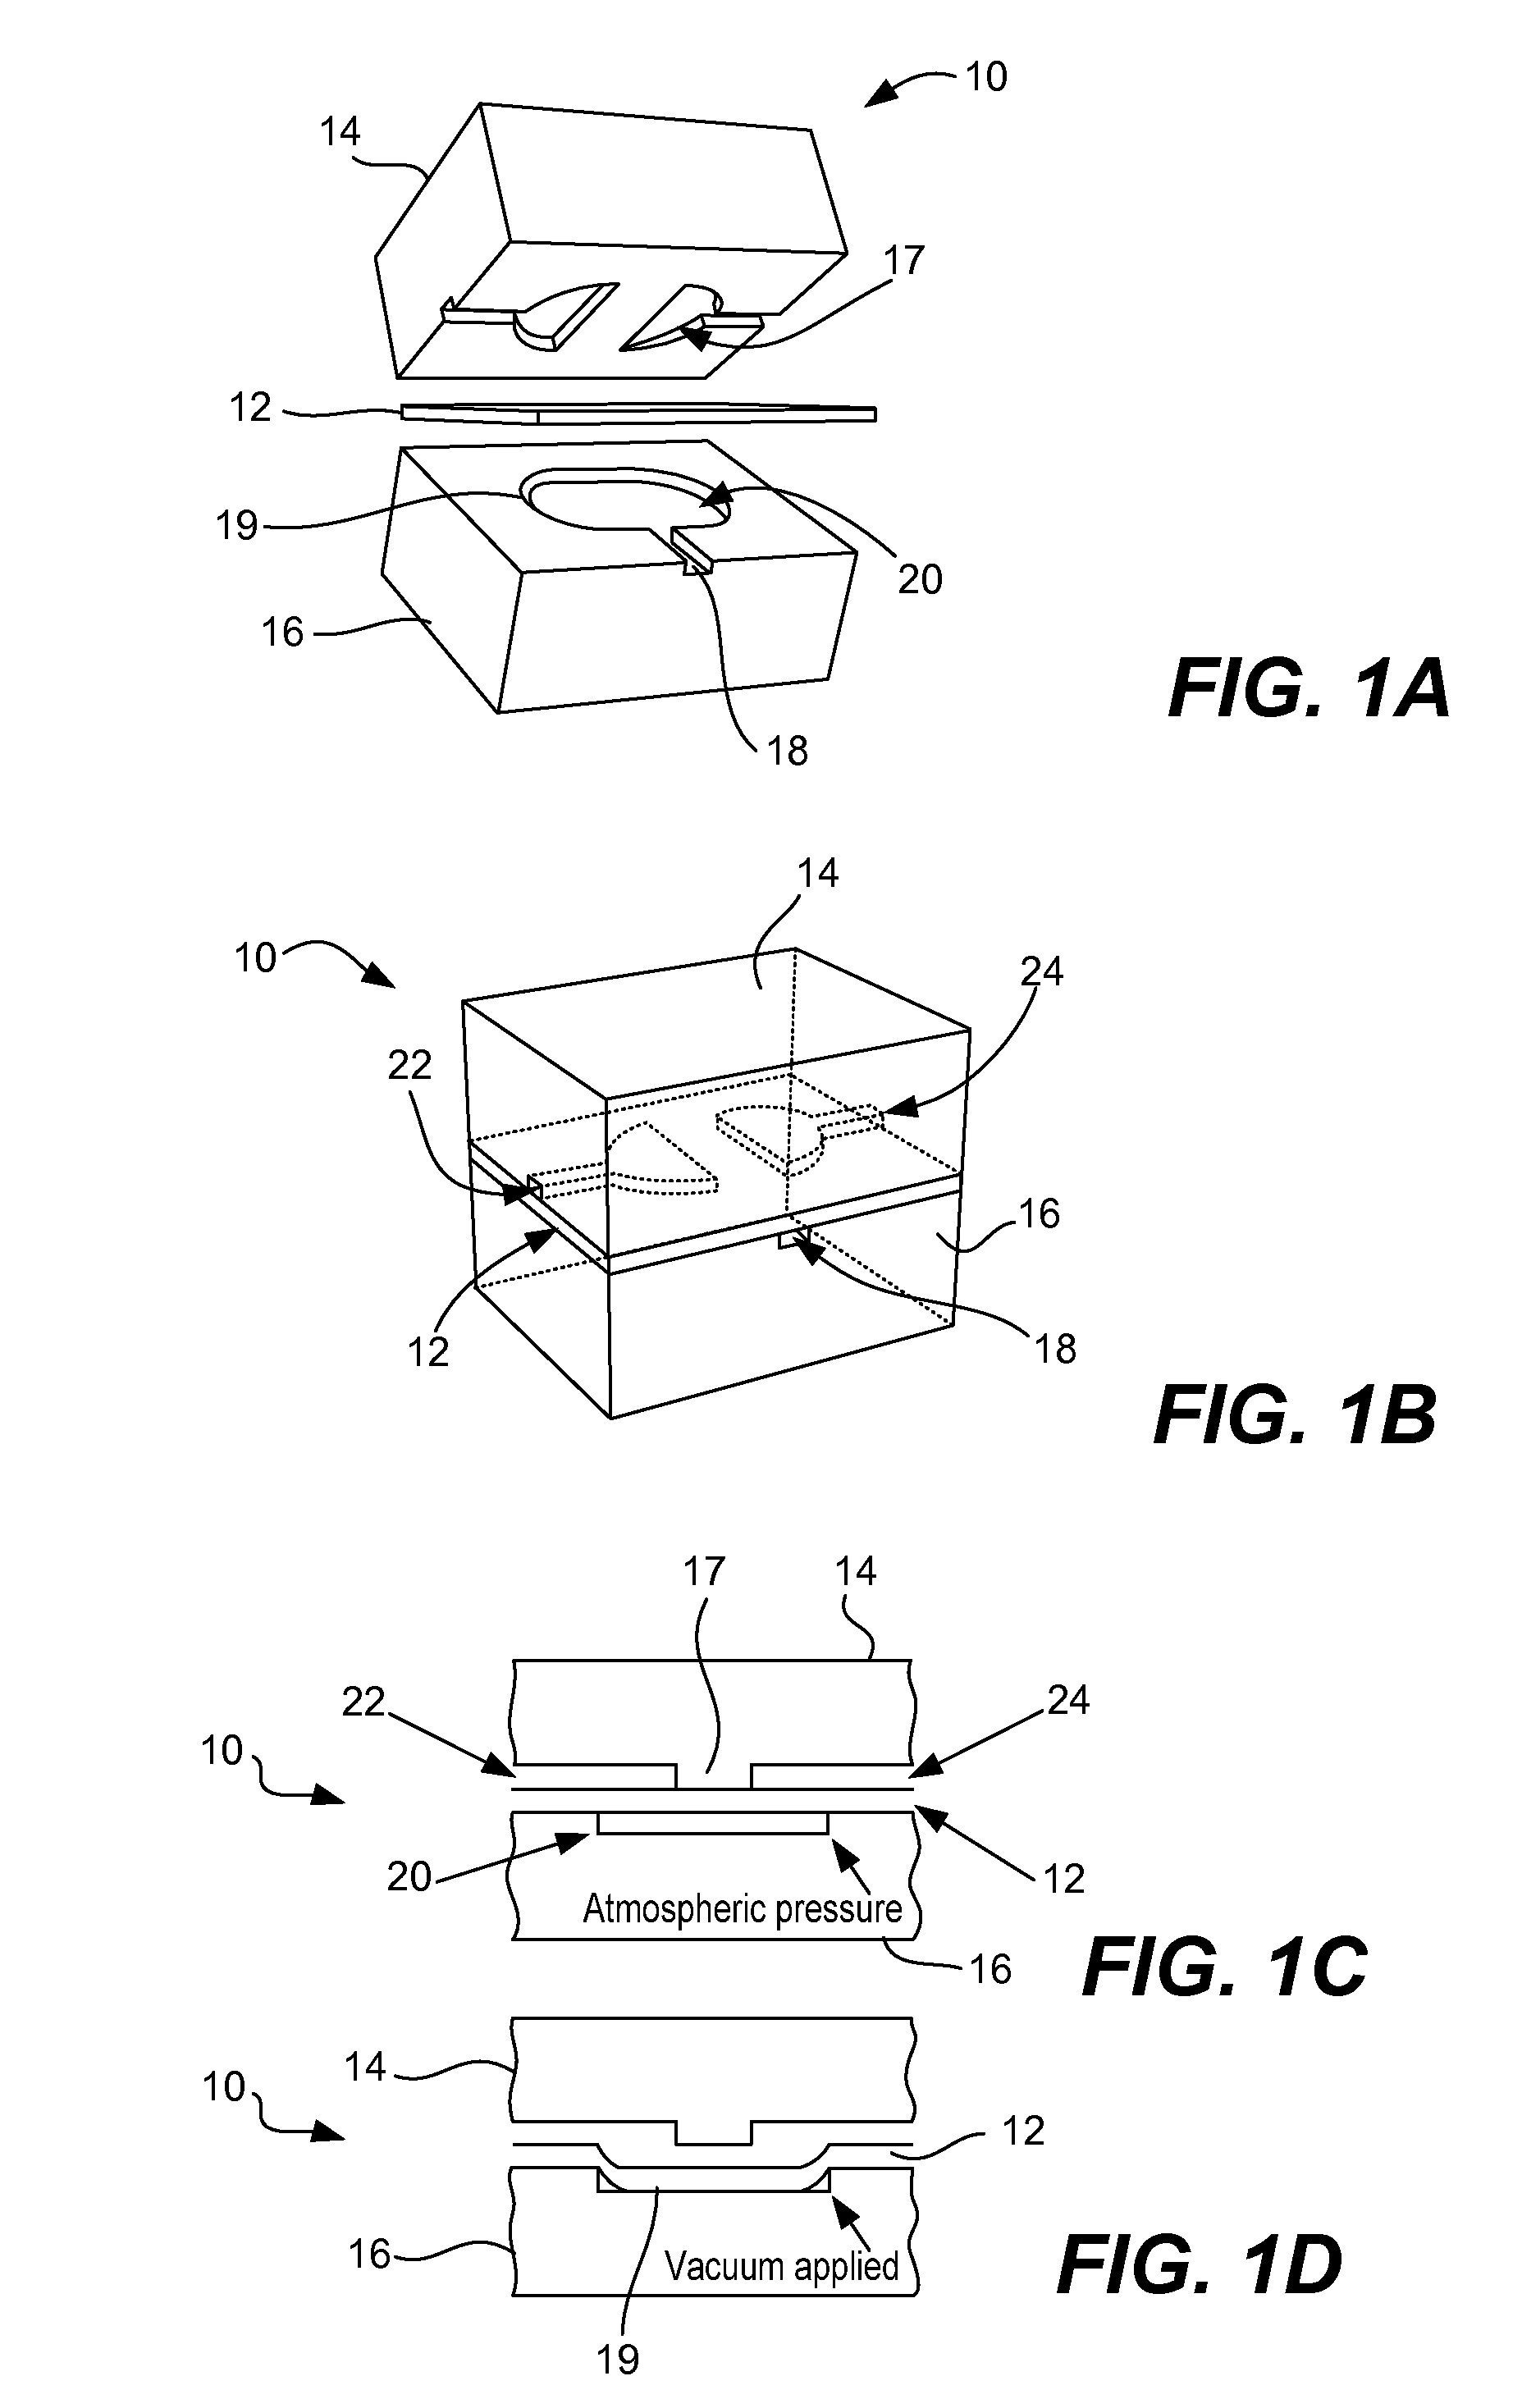 Multiplexed latching valves for microfluidic devices and processors